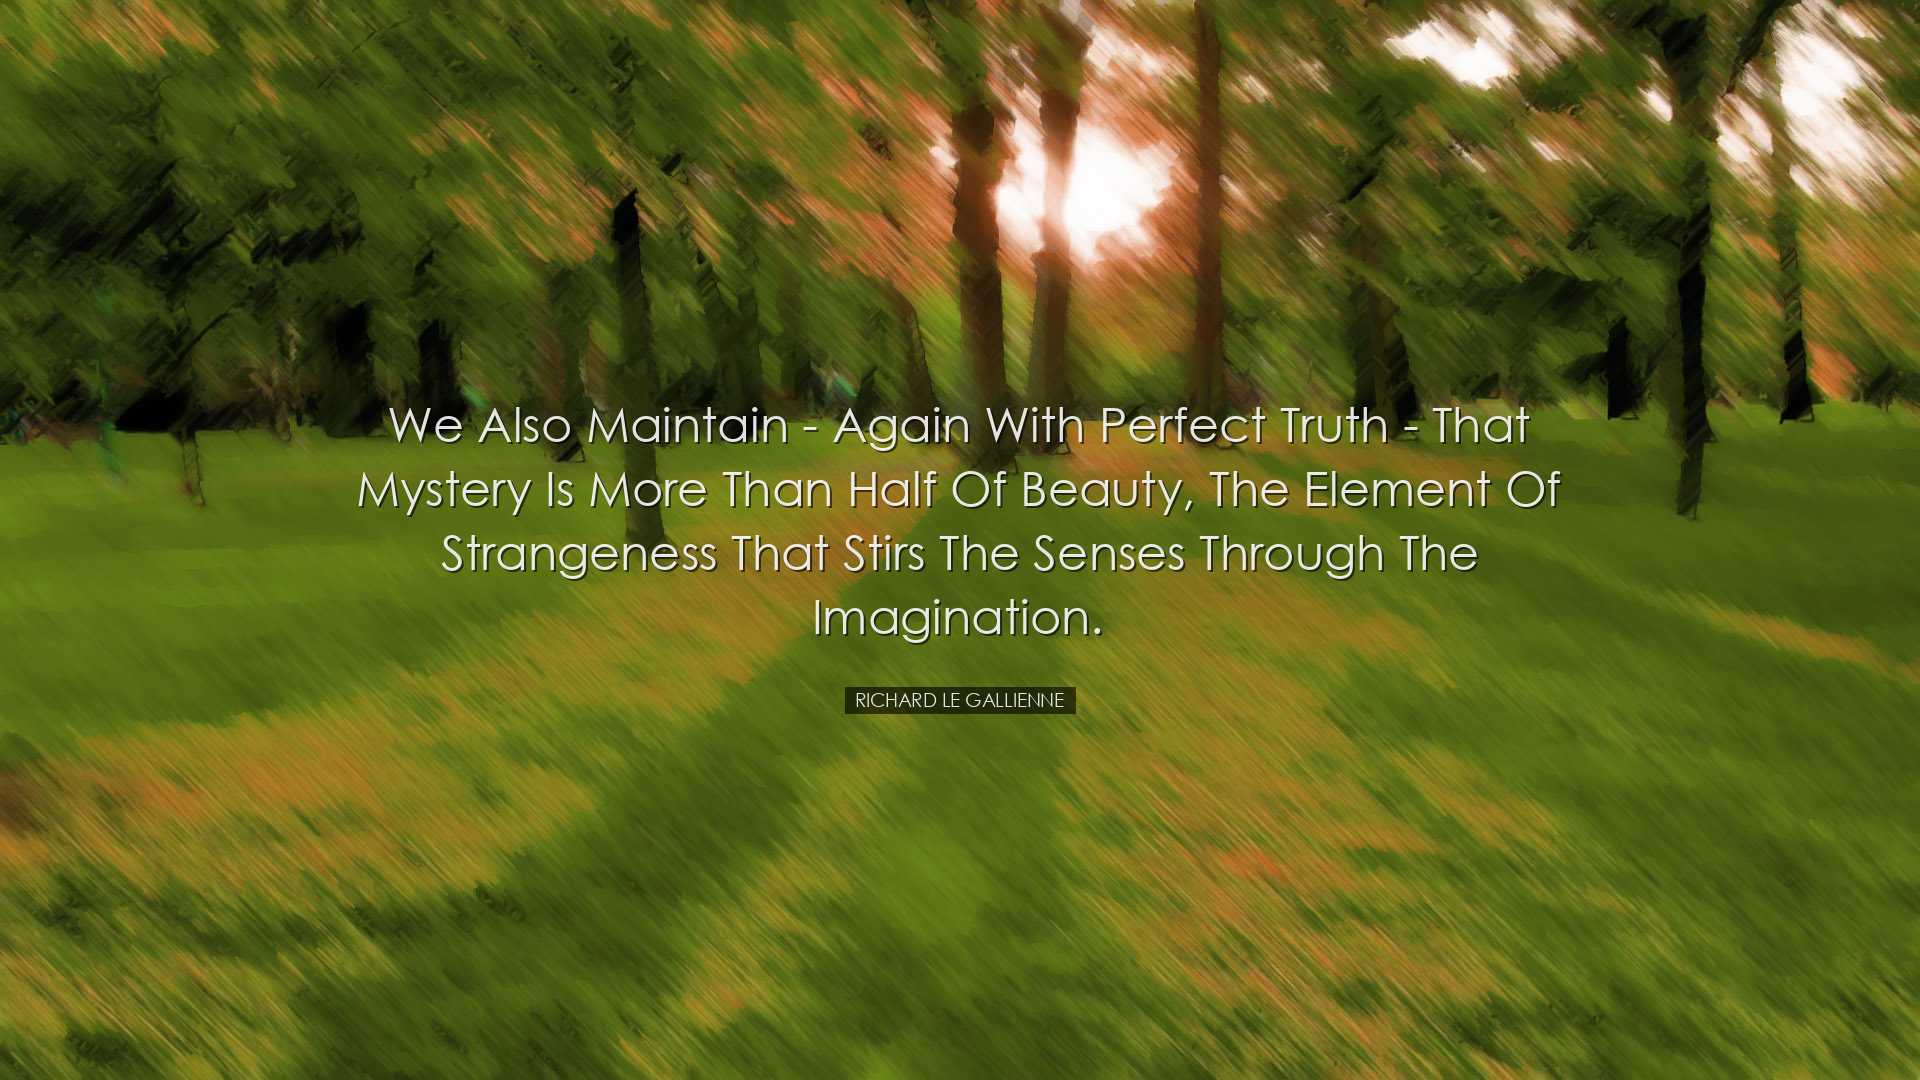 We also maintain - again with perfect truth - that mystery is more